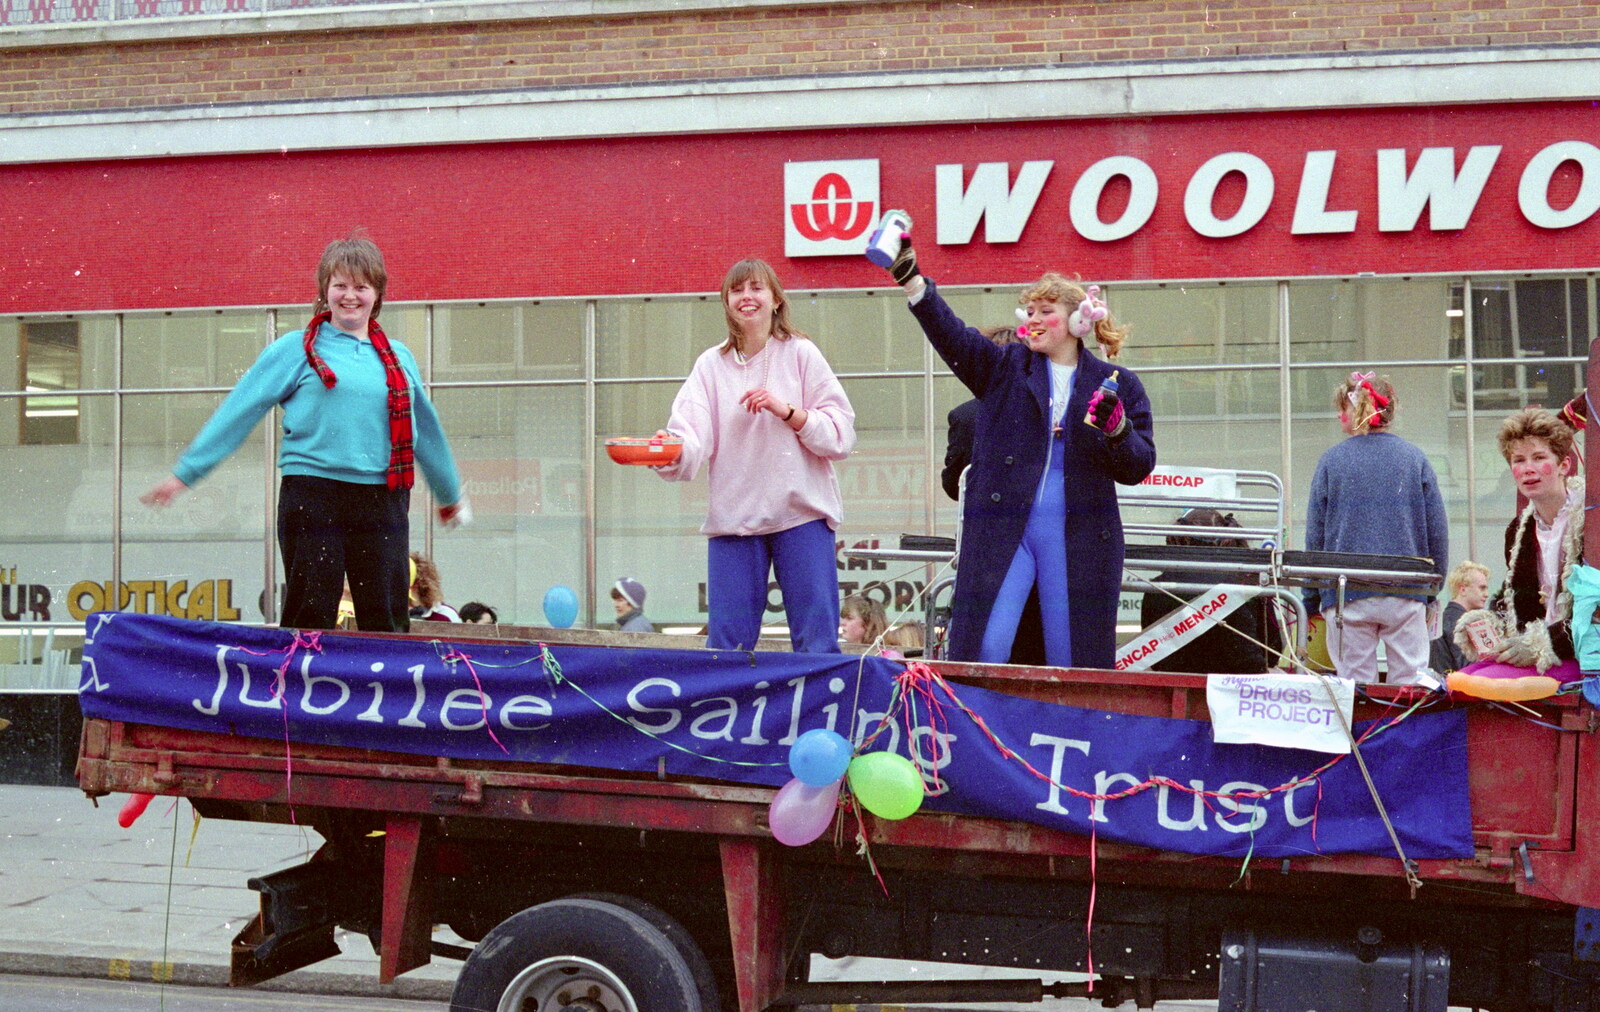 The Jubilee Sailing Trust outside Woolworths from Uni: PPSU "Jazz" RAG Street Parade, Plymouth, Devon - 17th February 1986